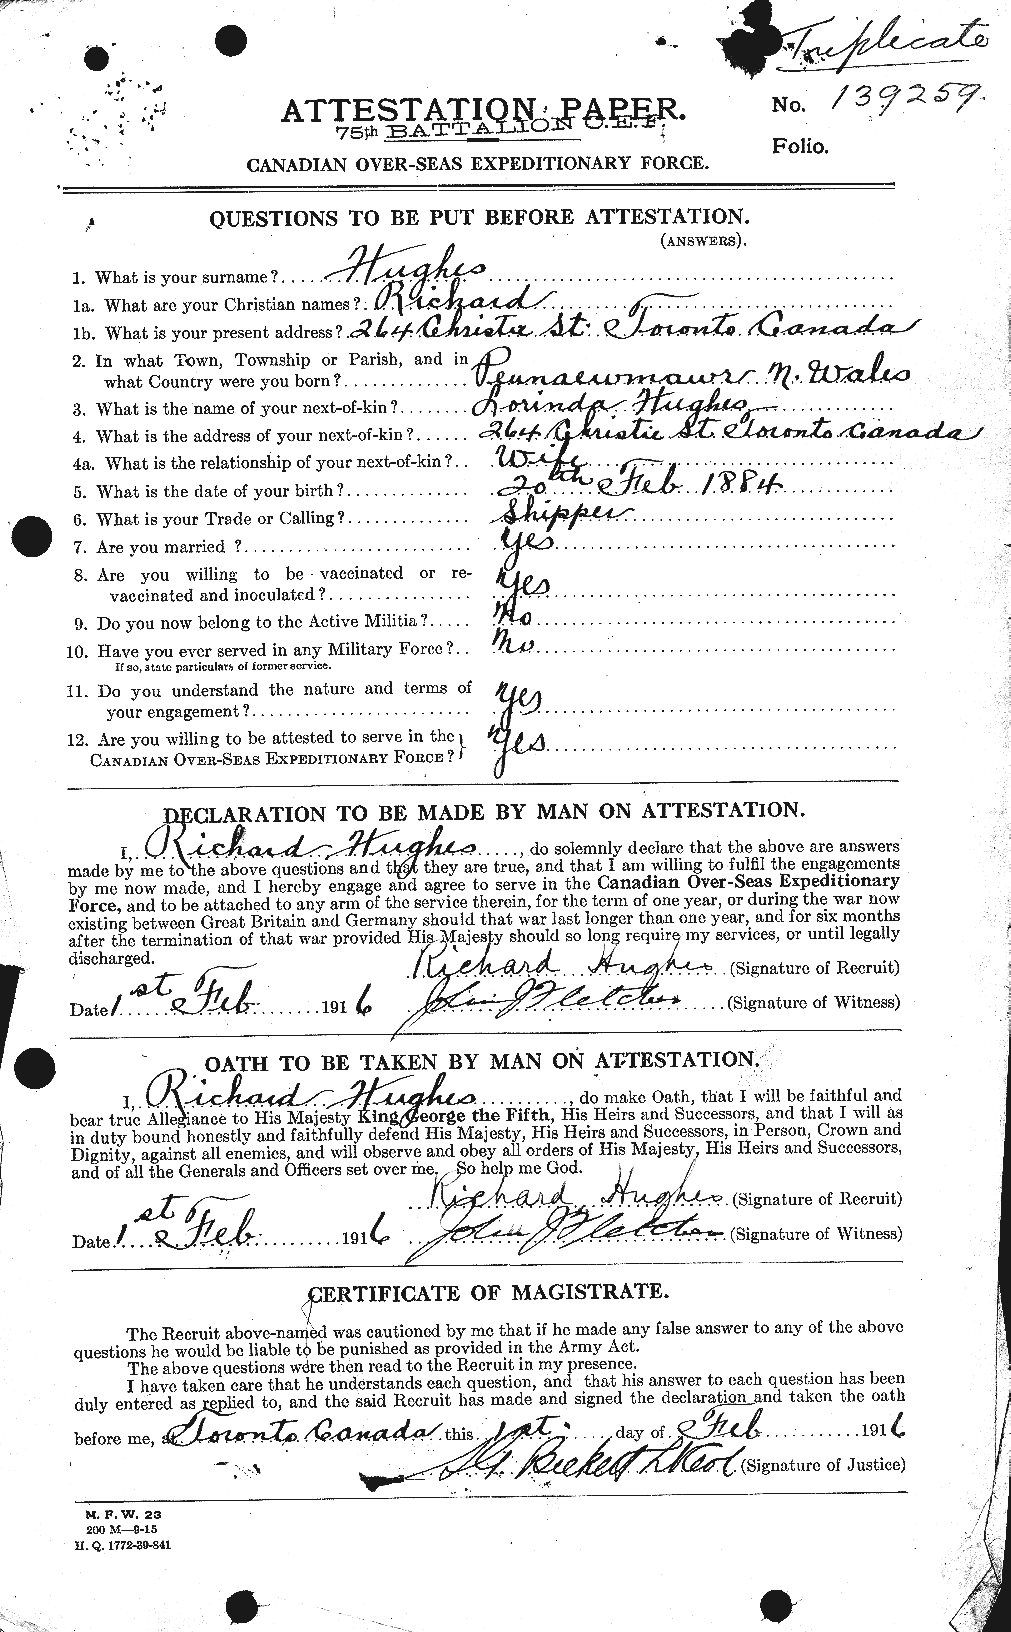 Personnel Records of the First World War - CEF 404187a